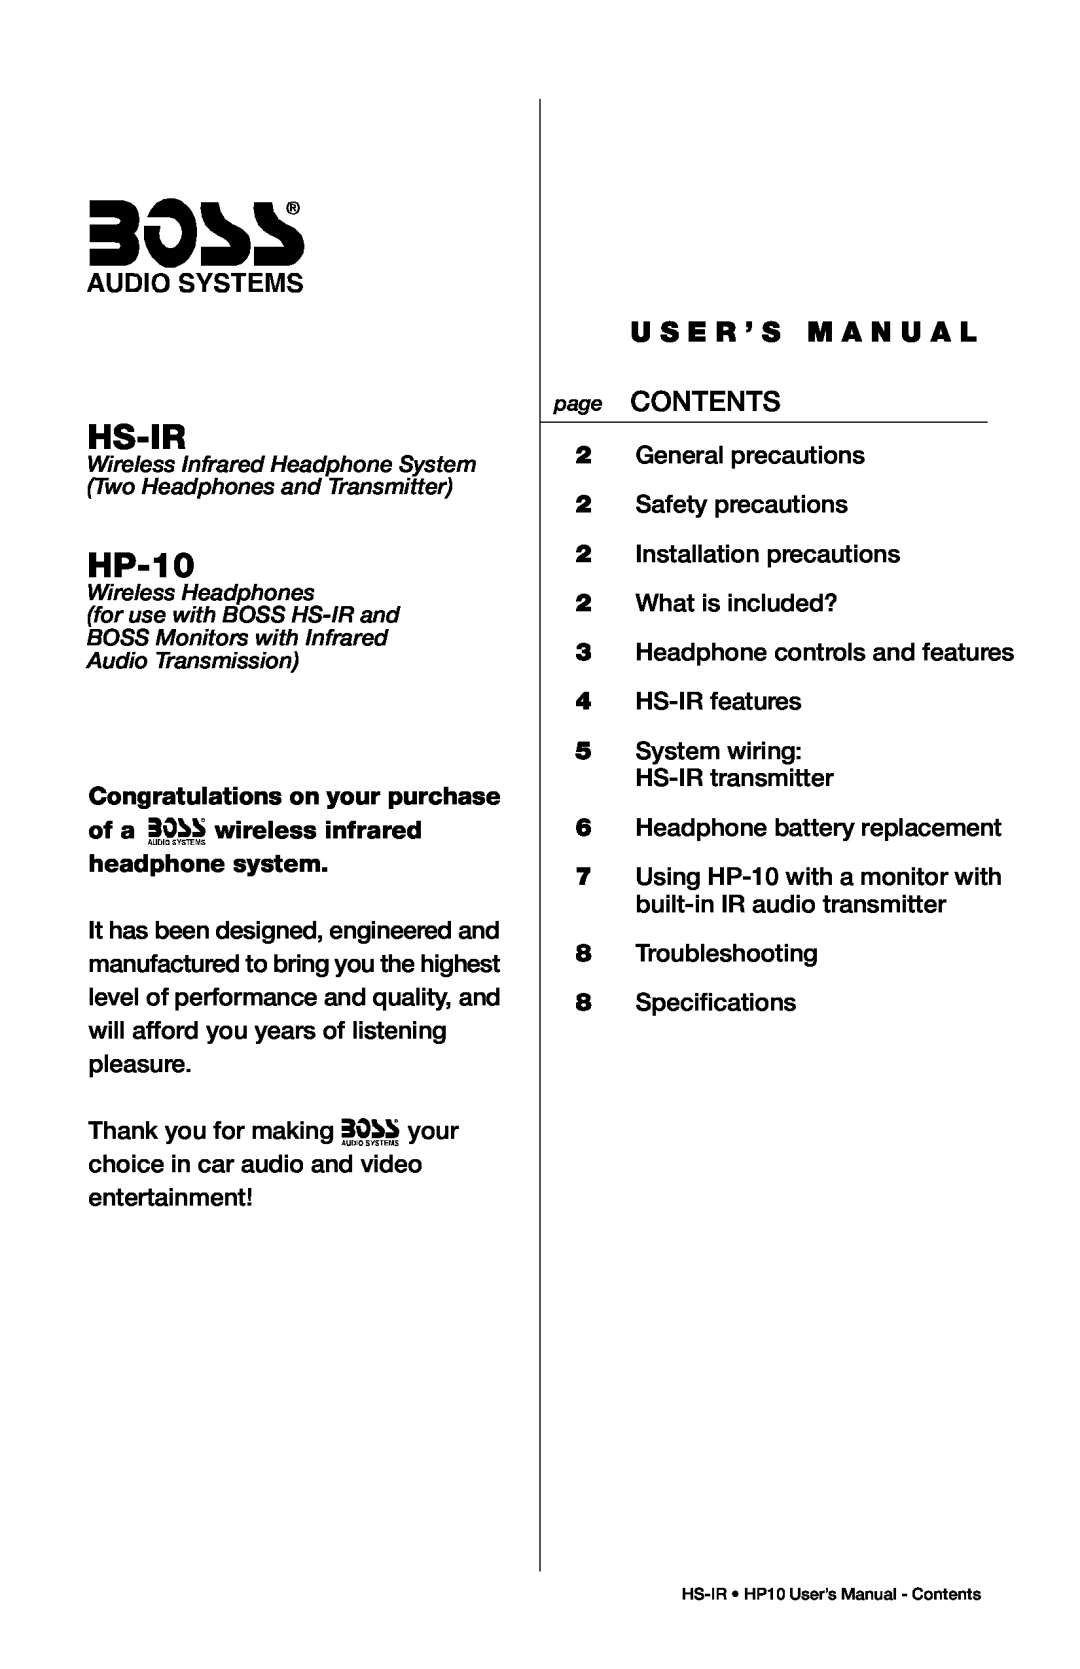 Boss Audio Systems HS-IR user manual U S E R ’ S M A N U A L, Congratulations on your purchase, Hs-Ir, HP-10, page CONTENTS 